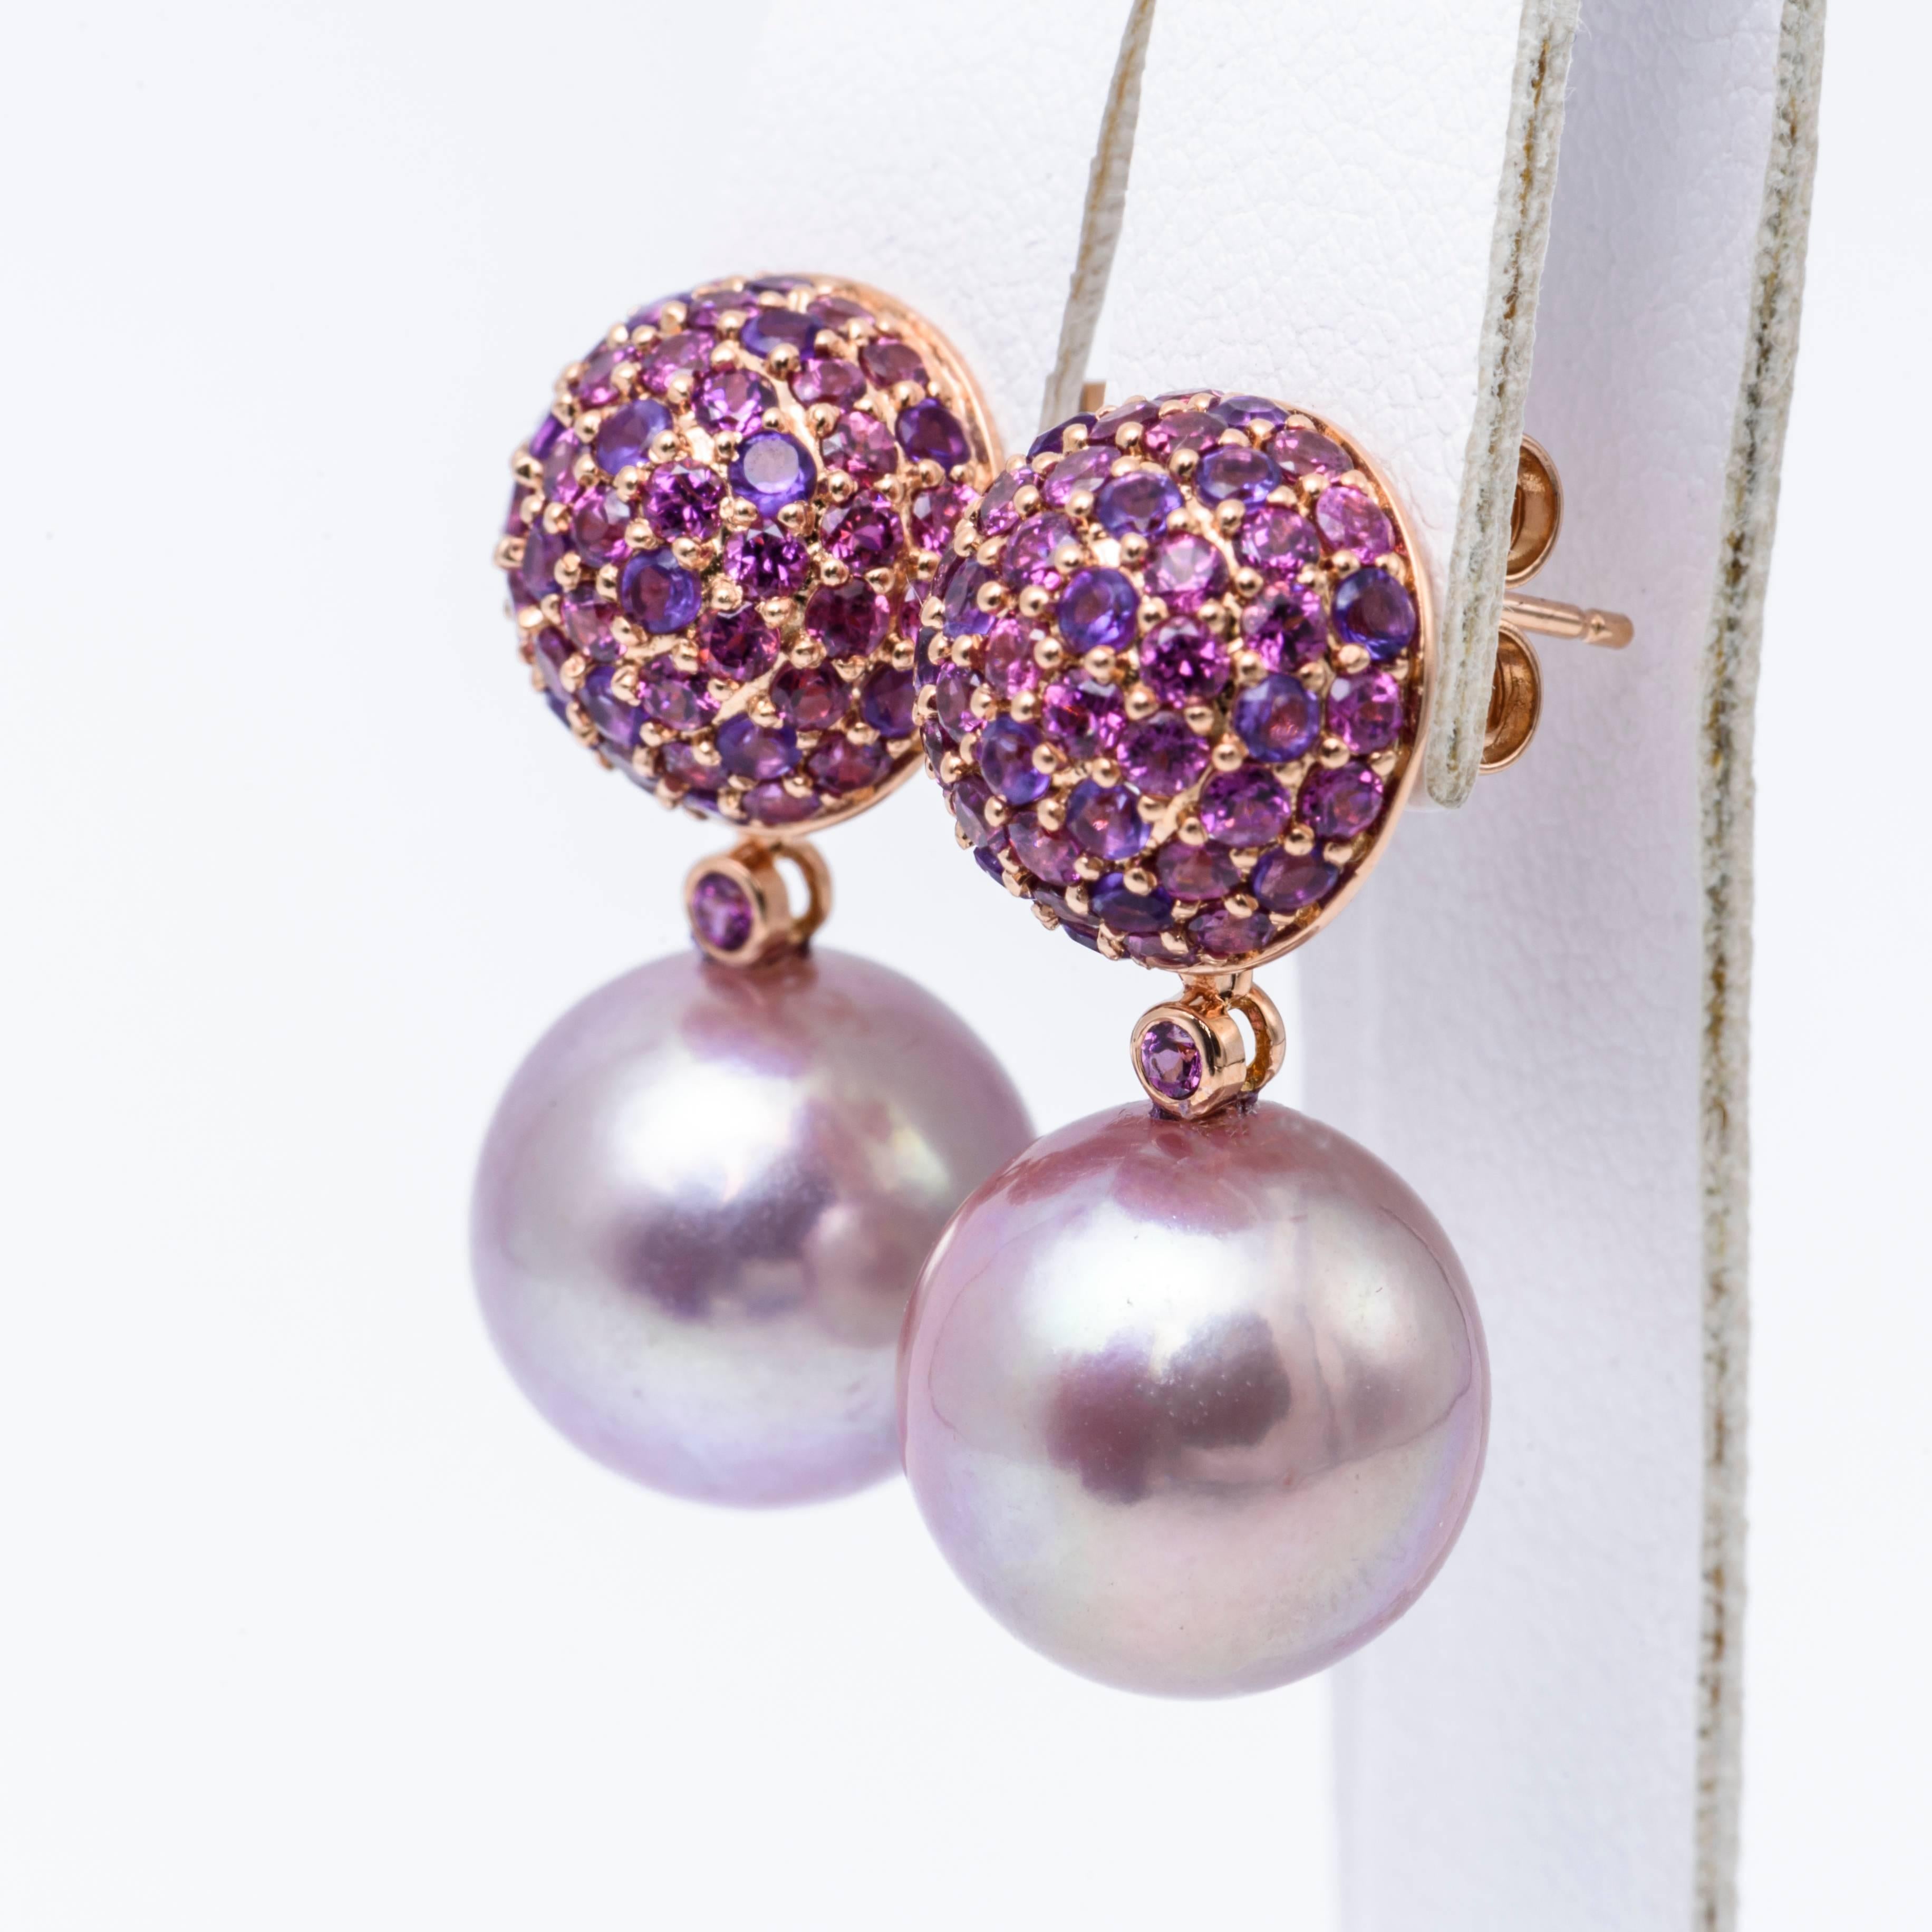 Pearl Size	12-13mm
Nature	Fresh Water Cultured Pearl
Pearl Quality	AA
Luster	Excellent
Nacre	Very Thick
Jewelry Style	Earrings
Metal Purity	18K
Metal Type	Rose Gold
Stone Shape Round
Stone Weight 2.80 ct.
Stone Color Rodolite and Amethyst in Purple